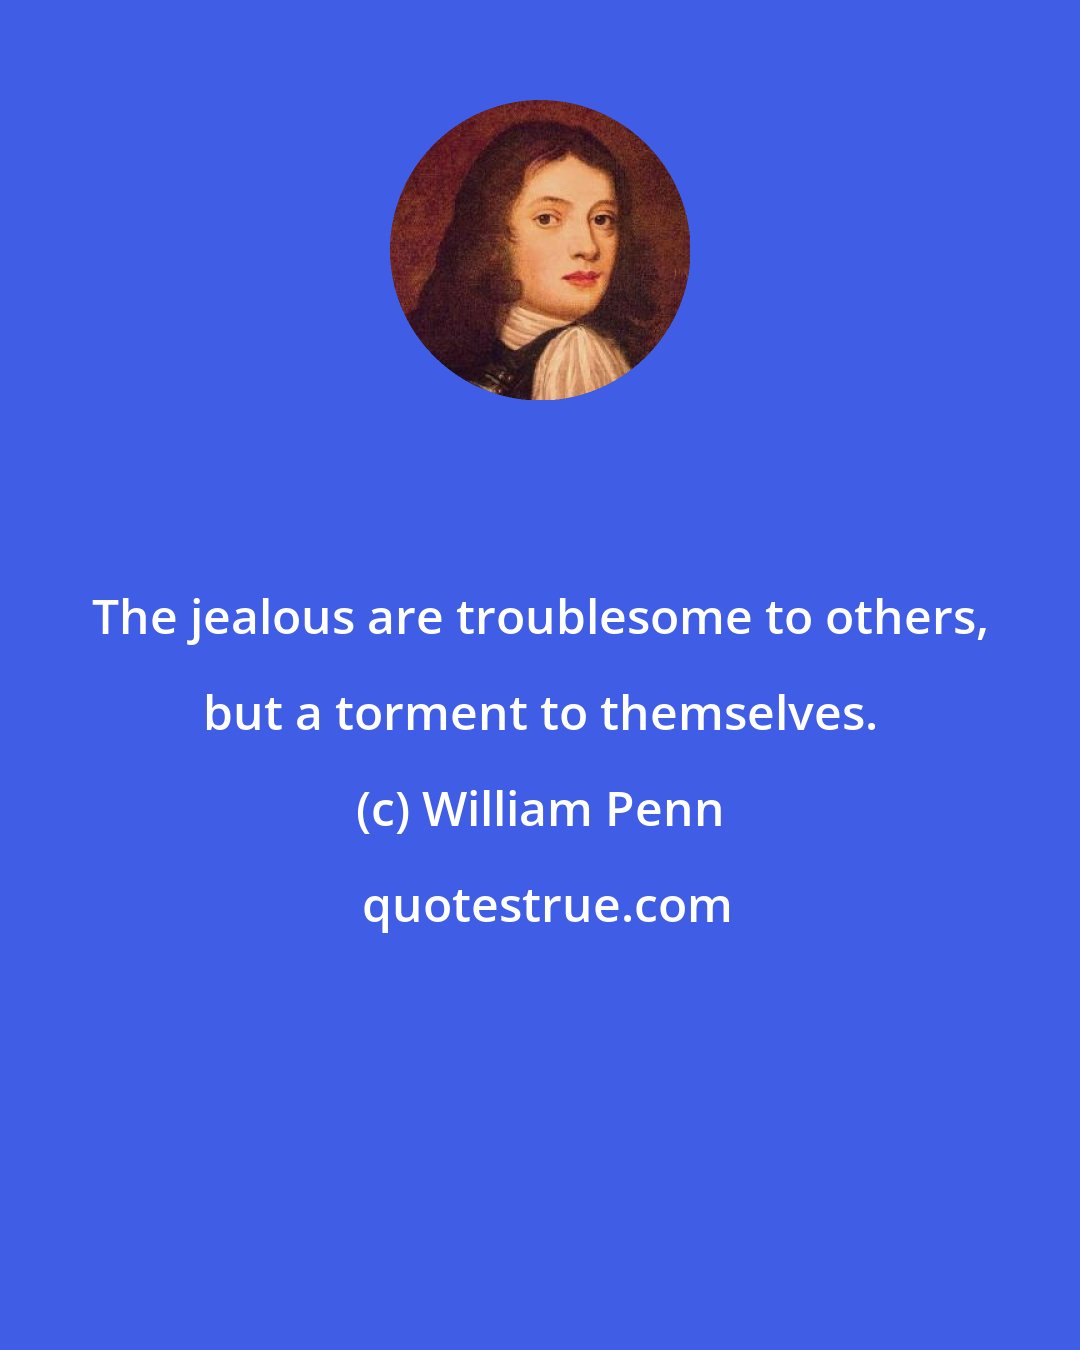 William Penn: The jealous are troublesome to others, but a torment to themselves.